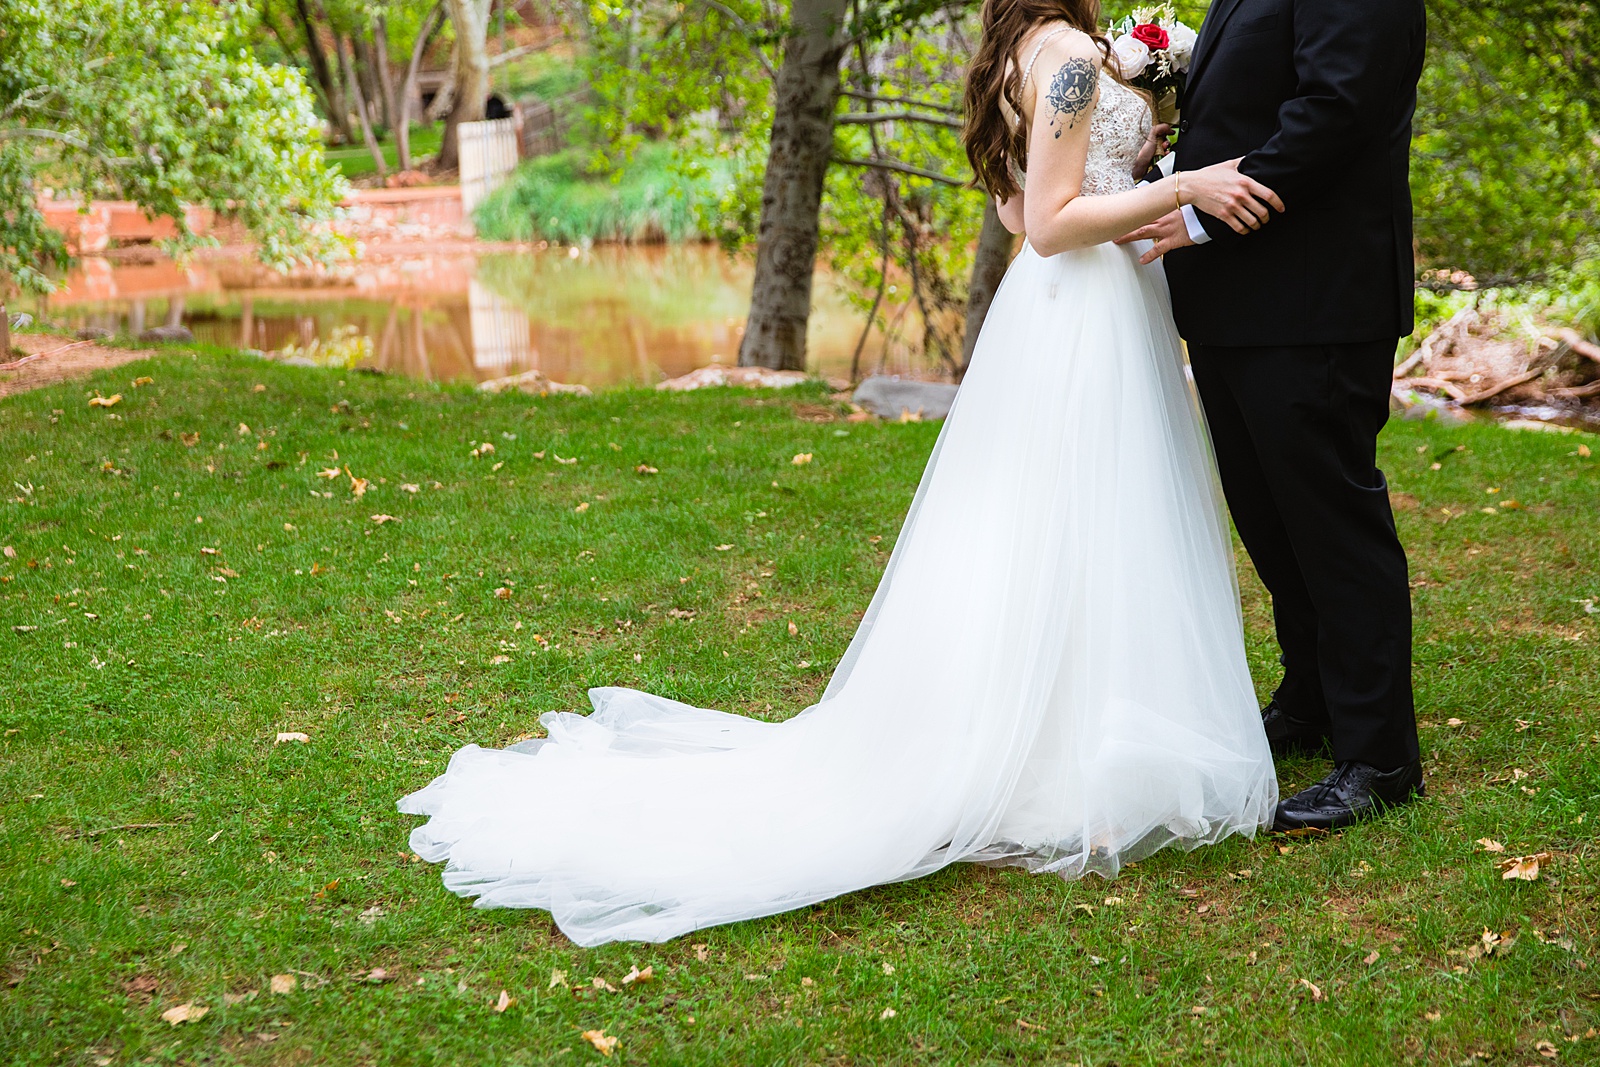 Bride and Groom's first look at Los Abrigados by Arizona wedding photographer PMA Photography.